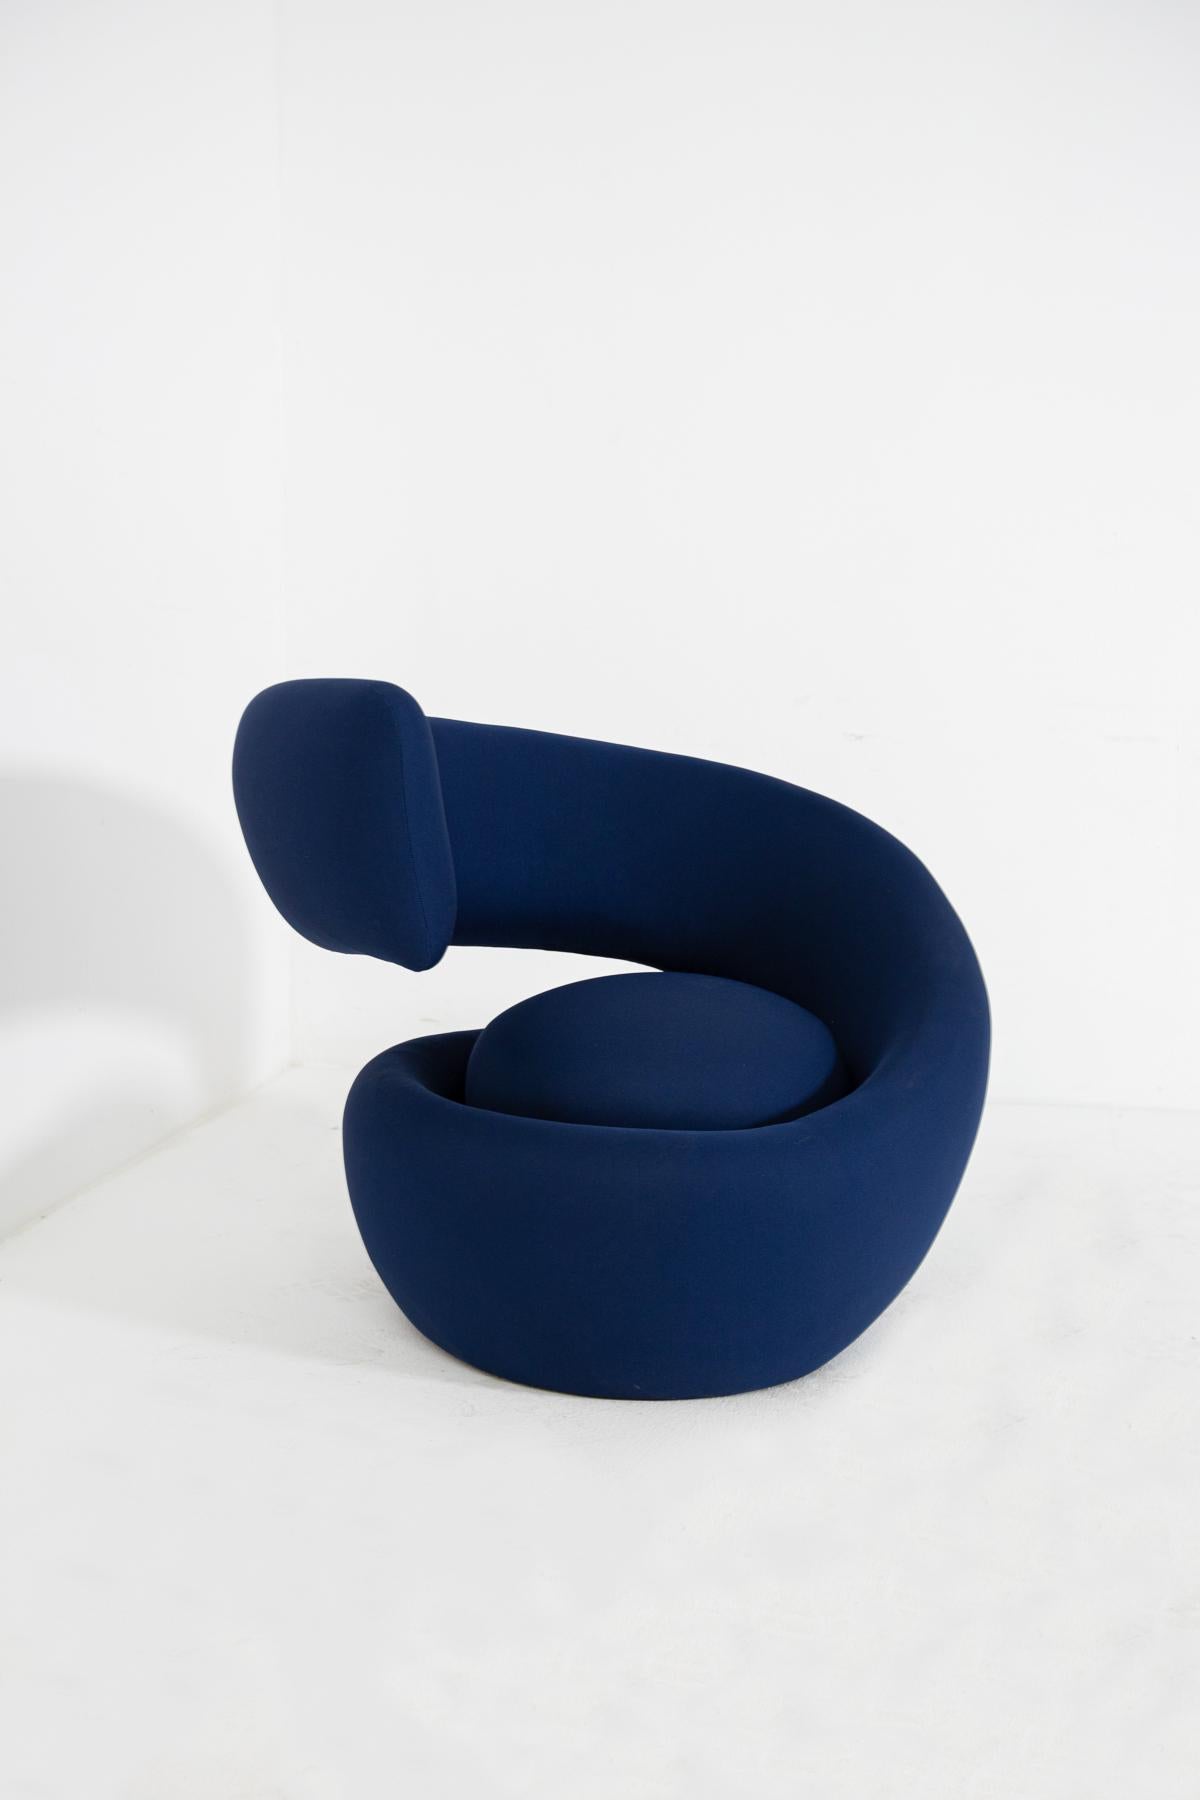 Rare spiral armchair designed by Marzio Cecchi for the Studio Most manufactory in the 1970s. The eclectic armchair has an unusual and extravagant vortex-shaped design. In fact, from its base spreads in the shape of
a spiral spreads out from its